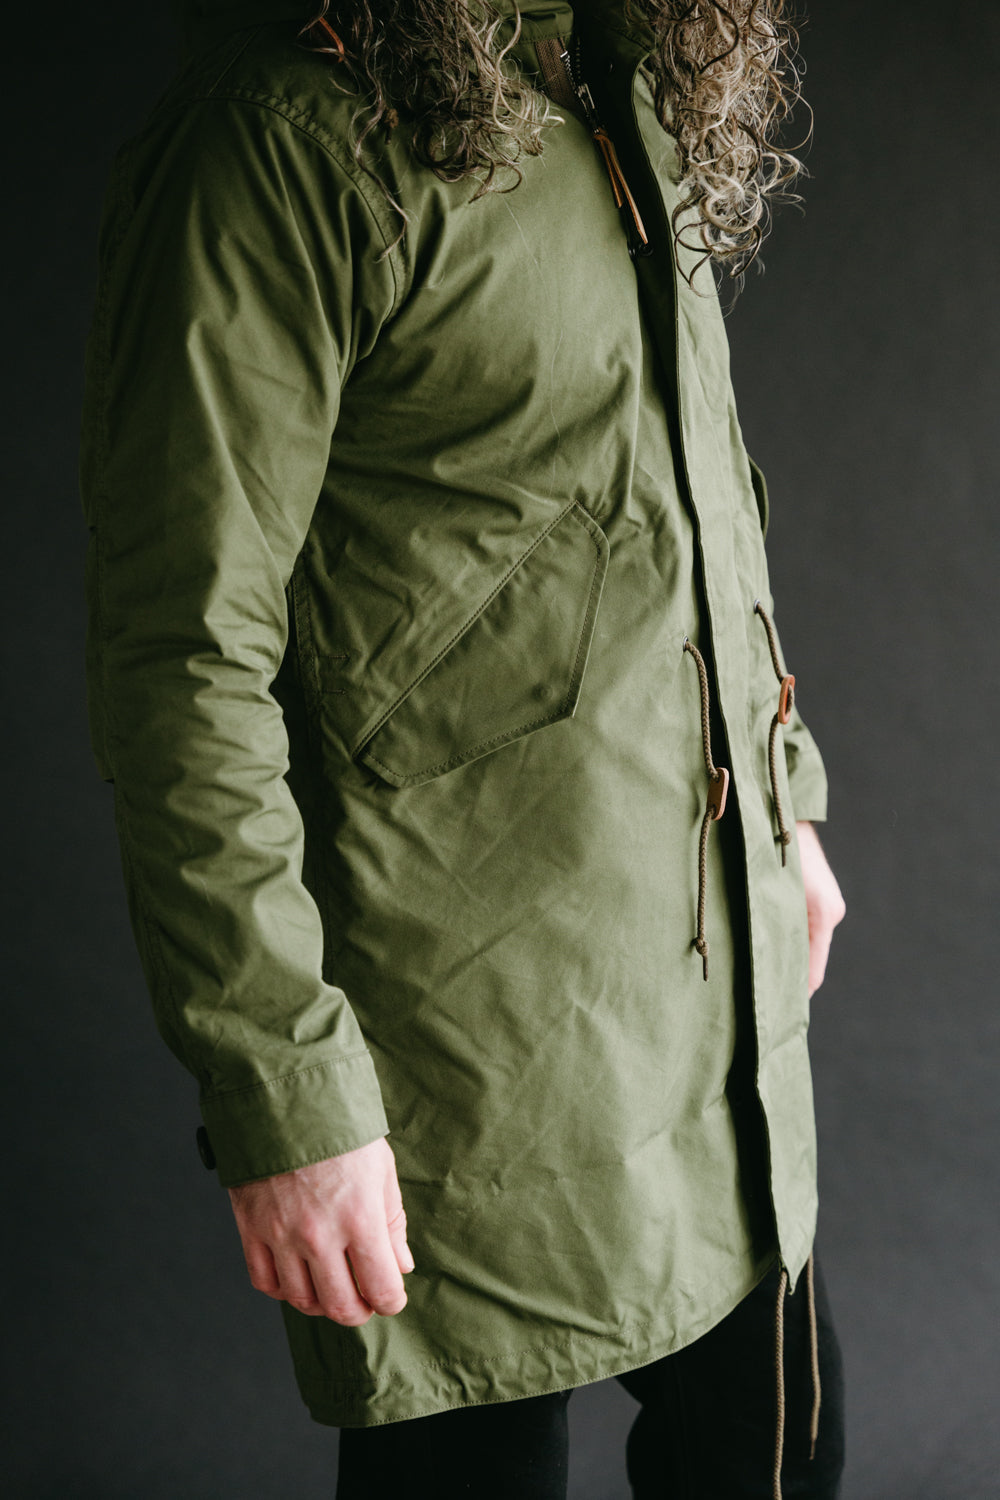 IHM-38-OLV - 5oz Quilted Lining M-51 Type Field Coat - Olive